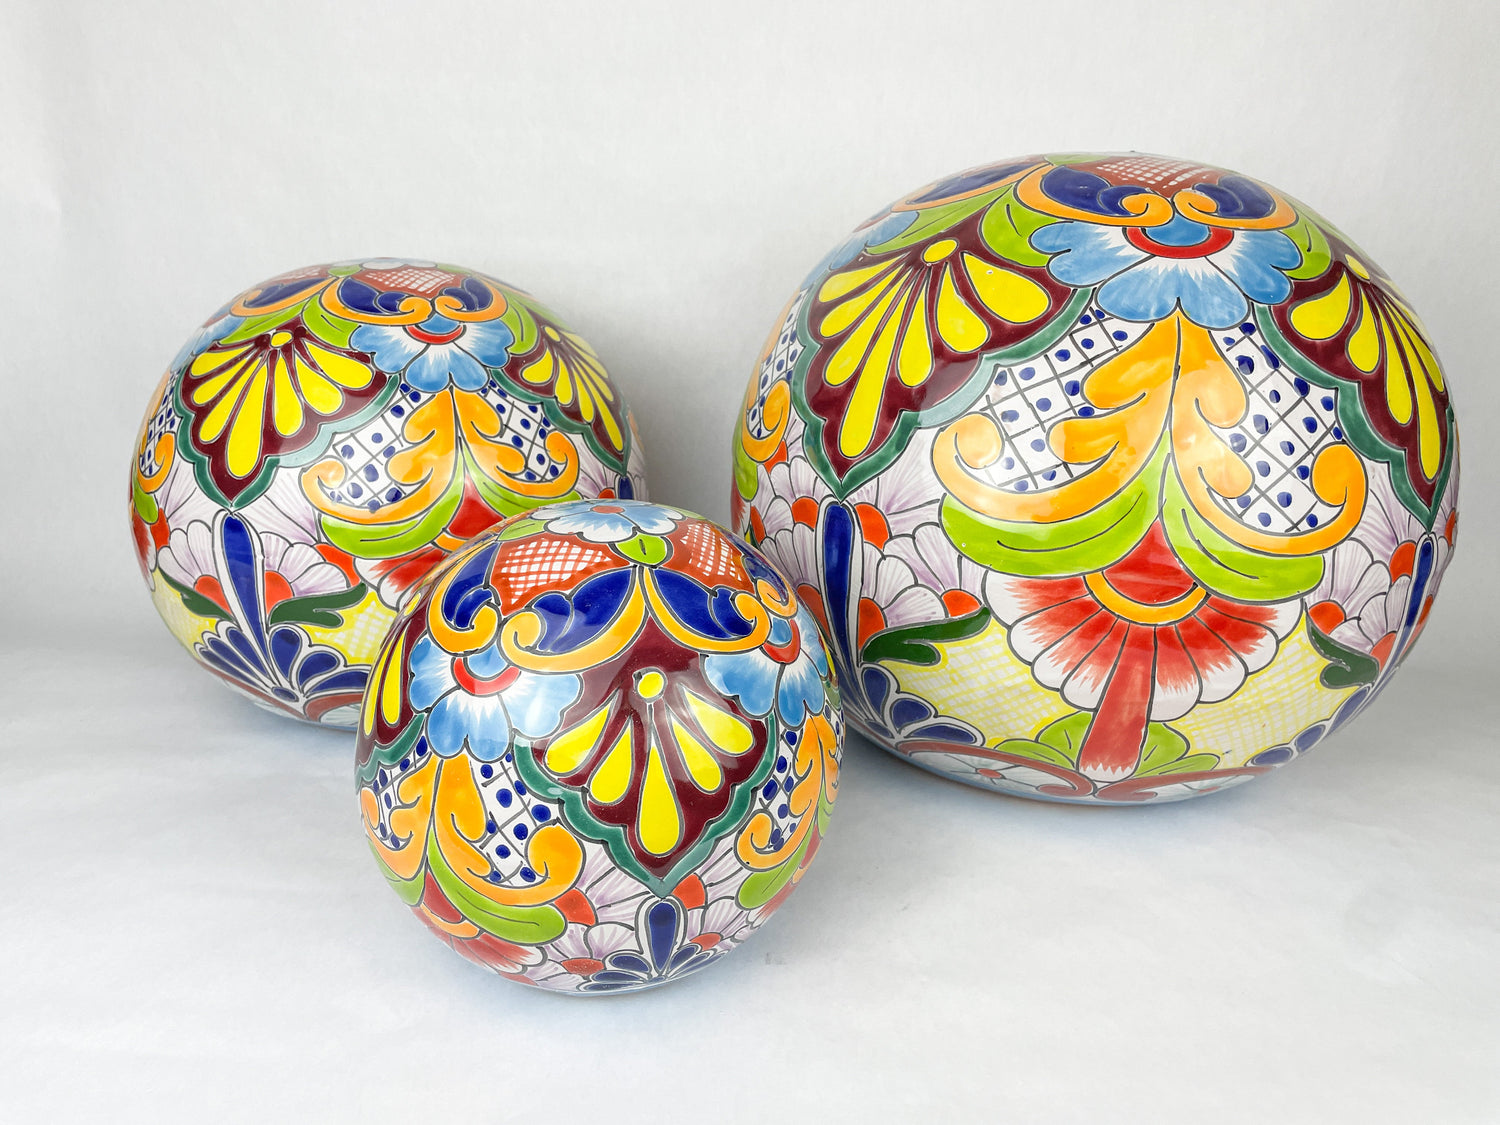 Talavera dinnerware set displaying vibrant Mexican patterns and beautiful colors